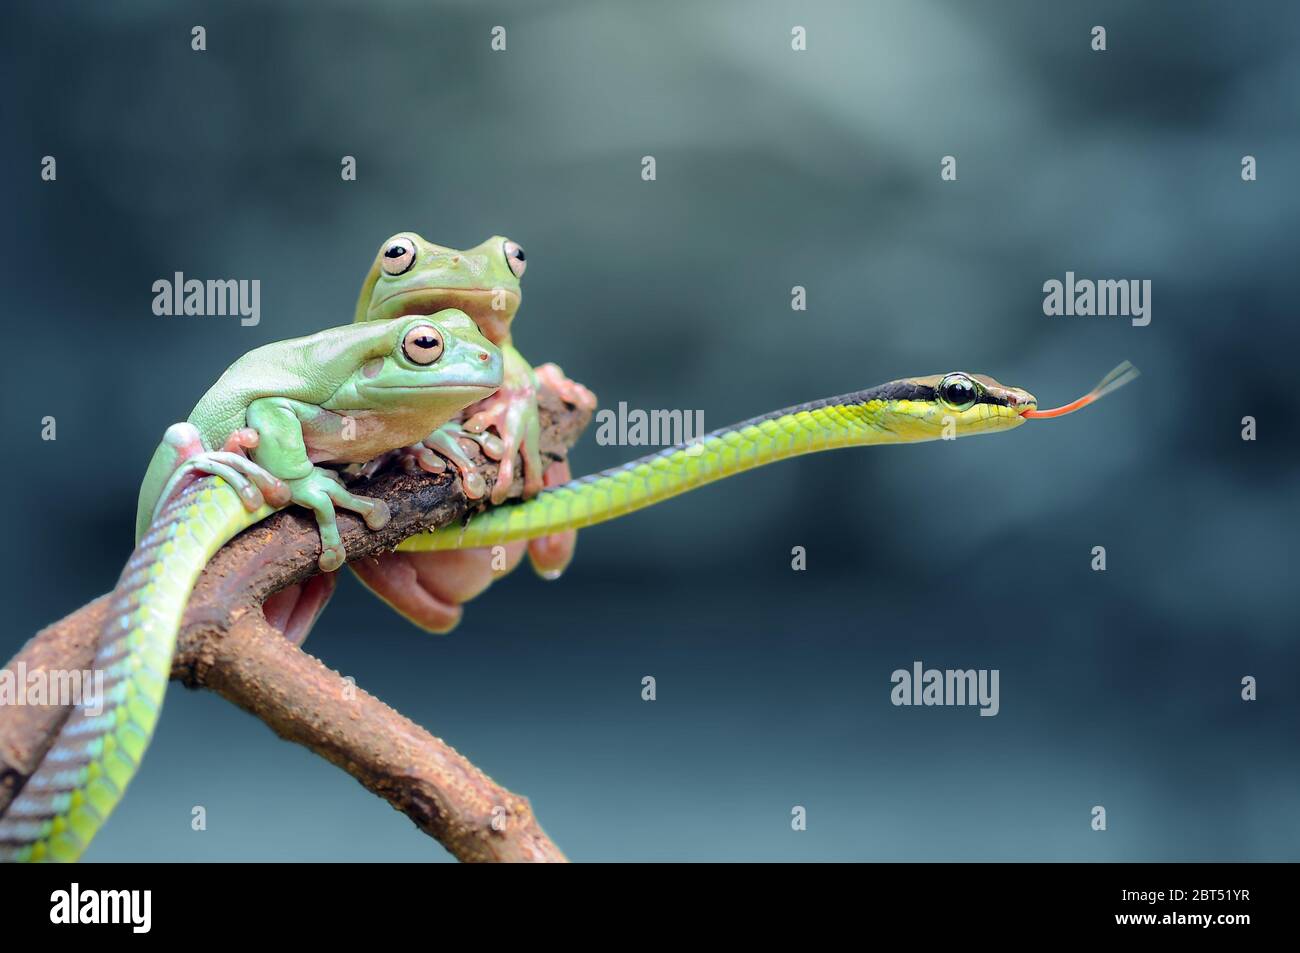 Two dumpy tree frogs and a green tree snake on a branch, Indonesia Stock Photo